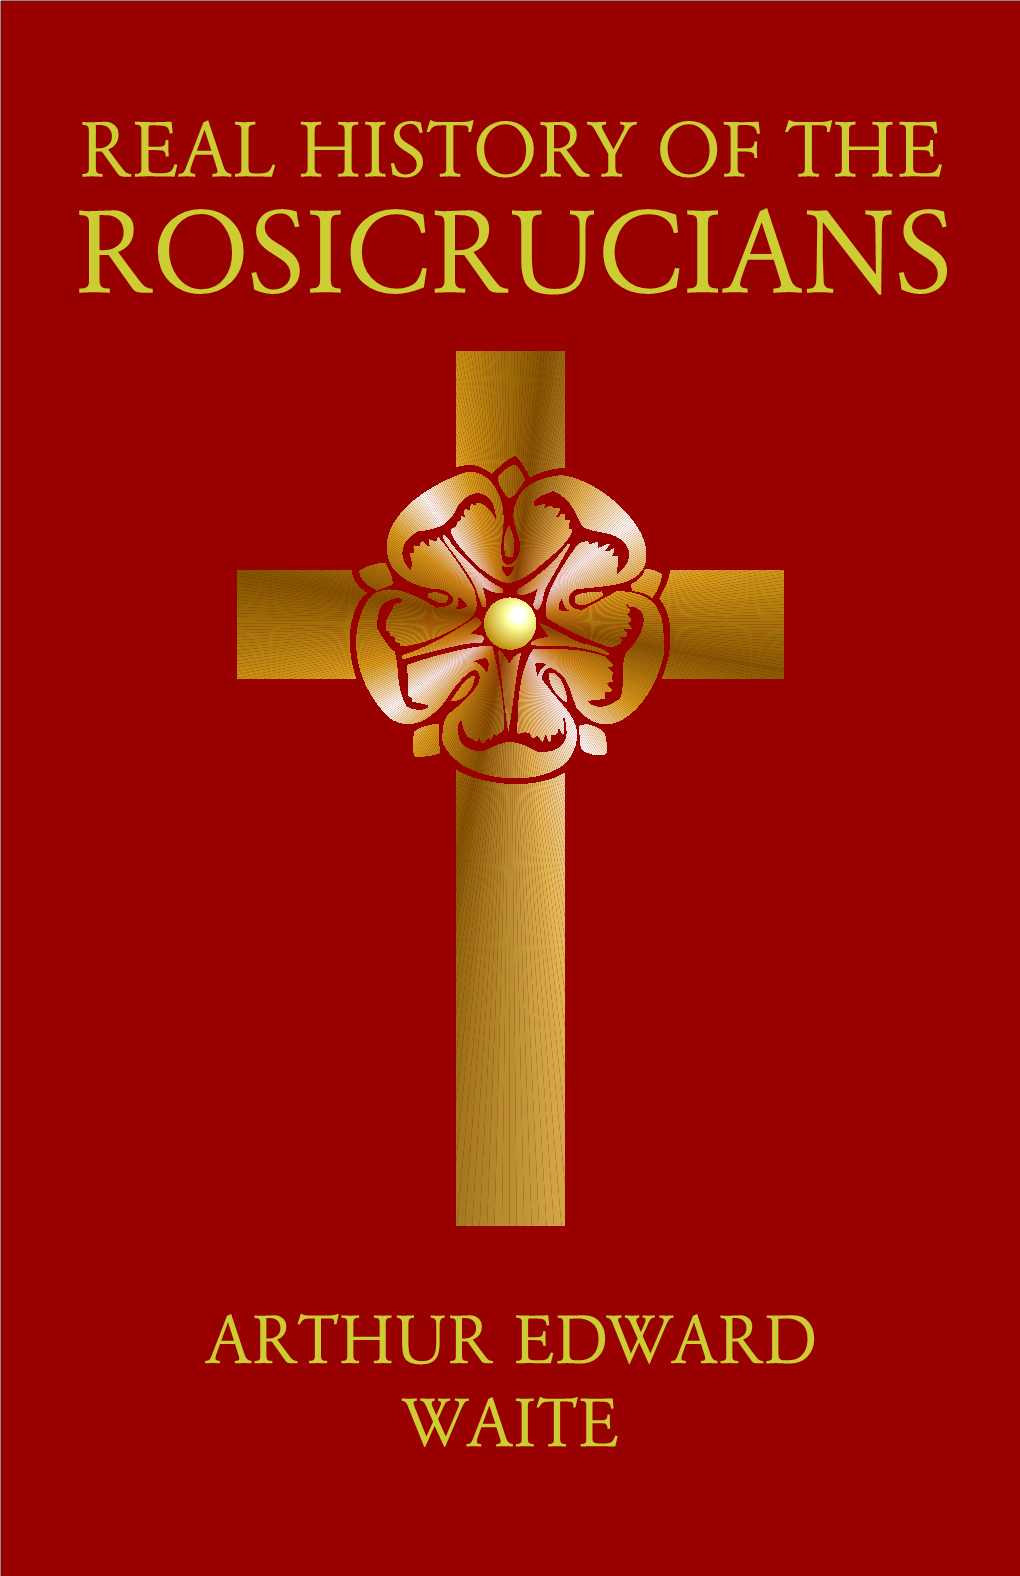 Real History of the Rosicrucians